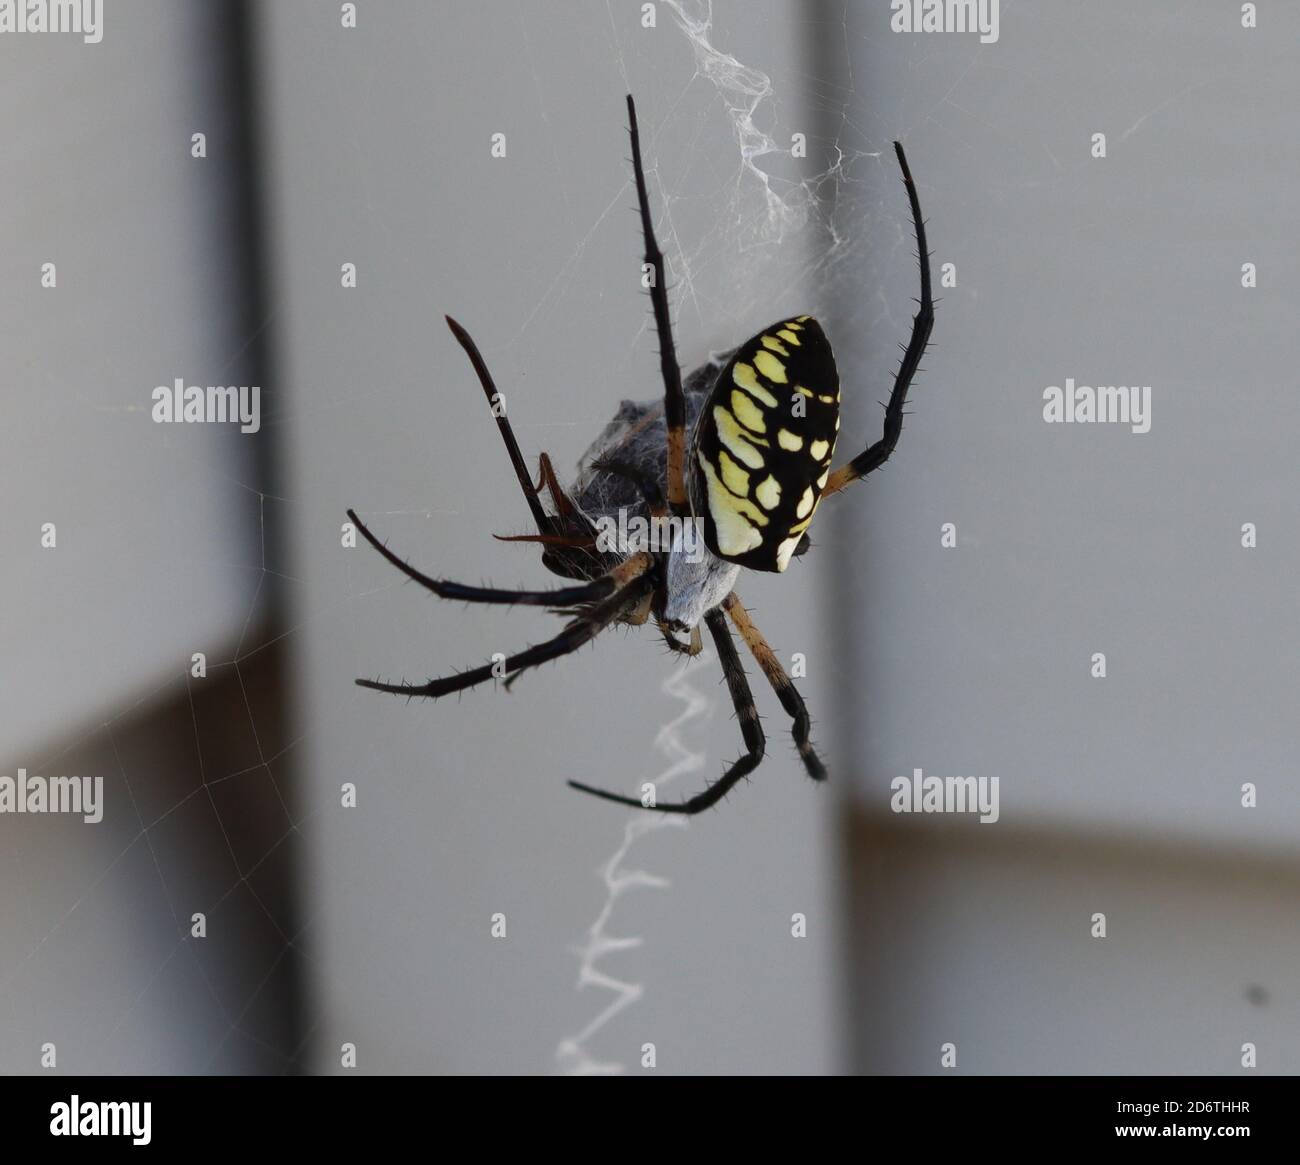 A cricket caught in an orb weaver spiders web Stock Photo